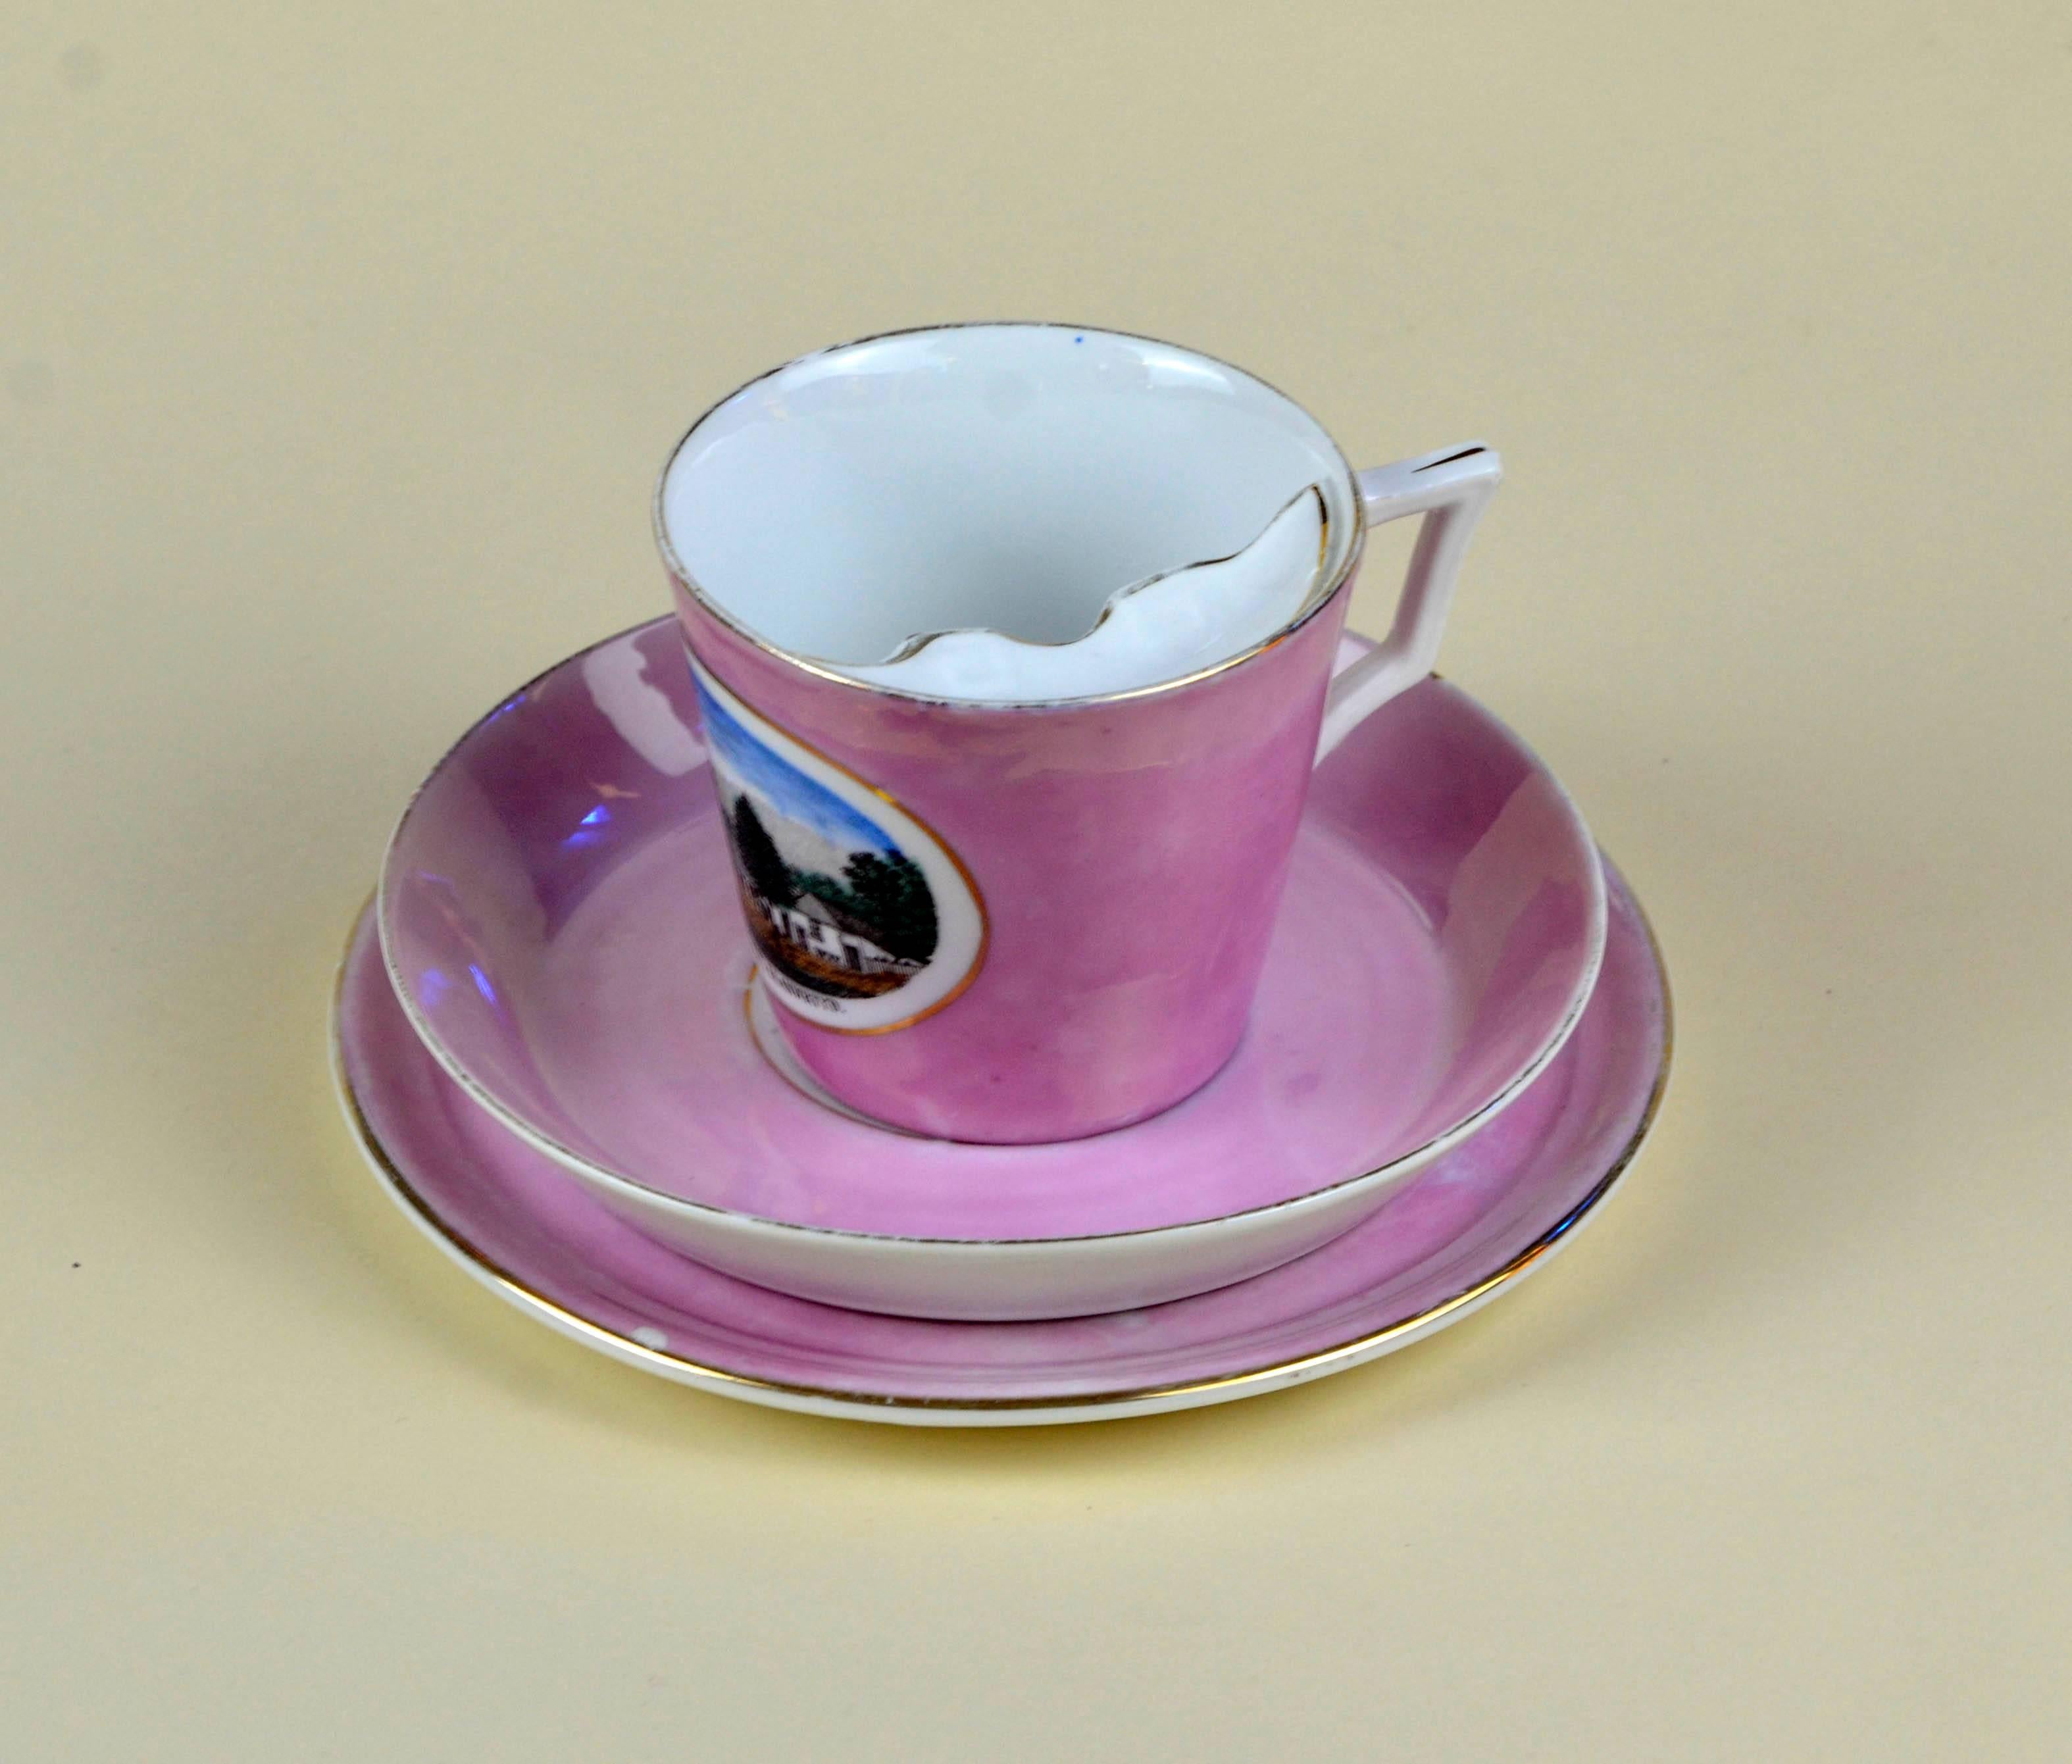 Edwardian 1900s Porcelain Souvenir Mustache Cup in Antique Pink Lustre Made in Germany For Sale